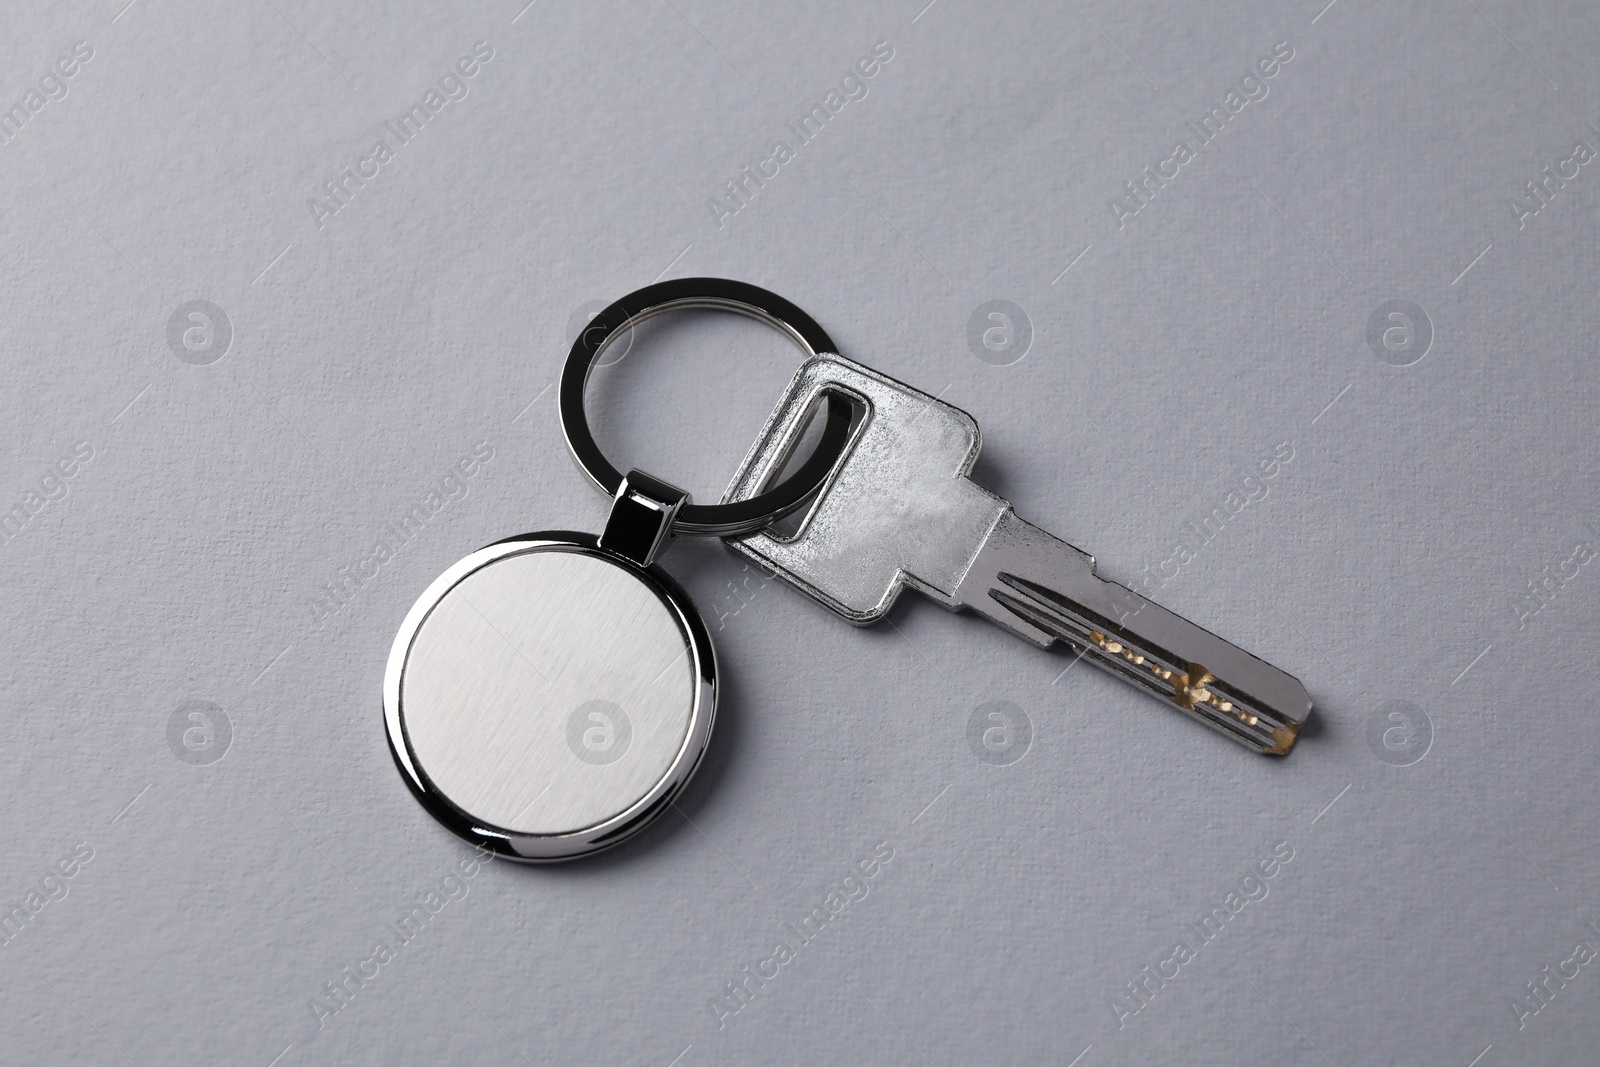 Photo of Key with metallic keychain on light grey background, top view